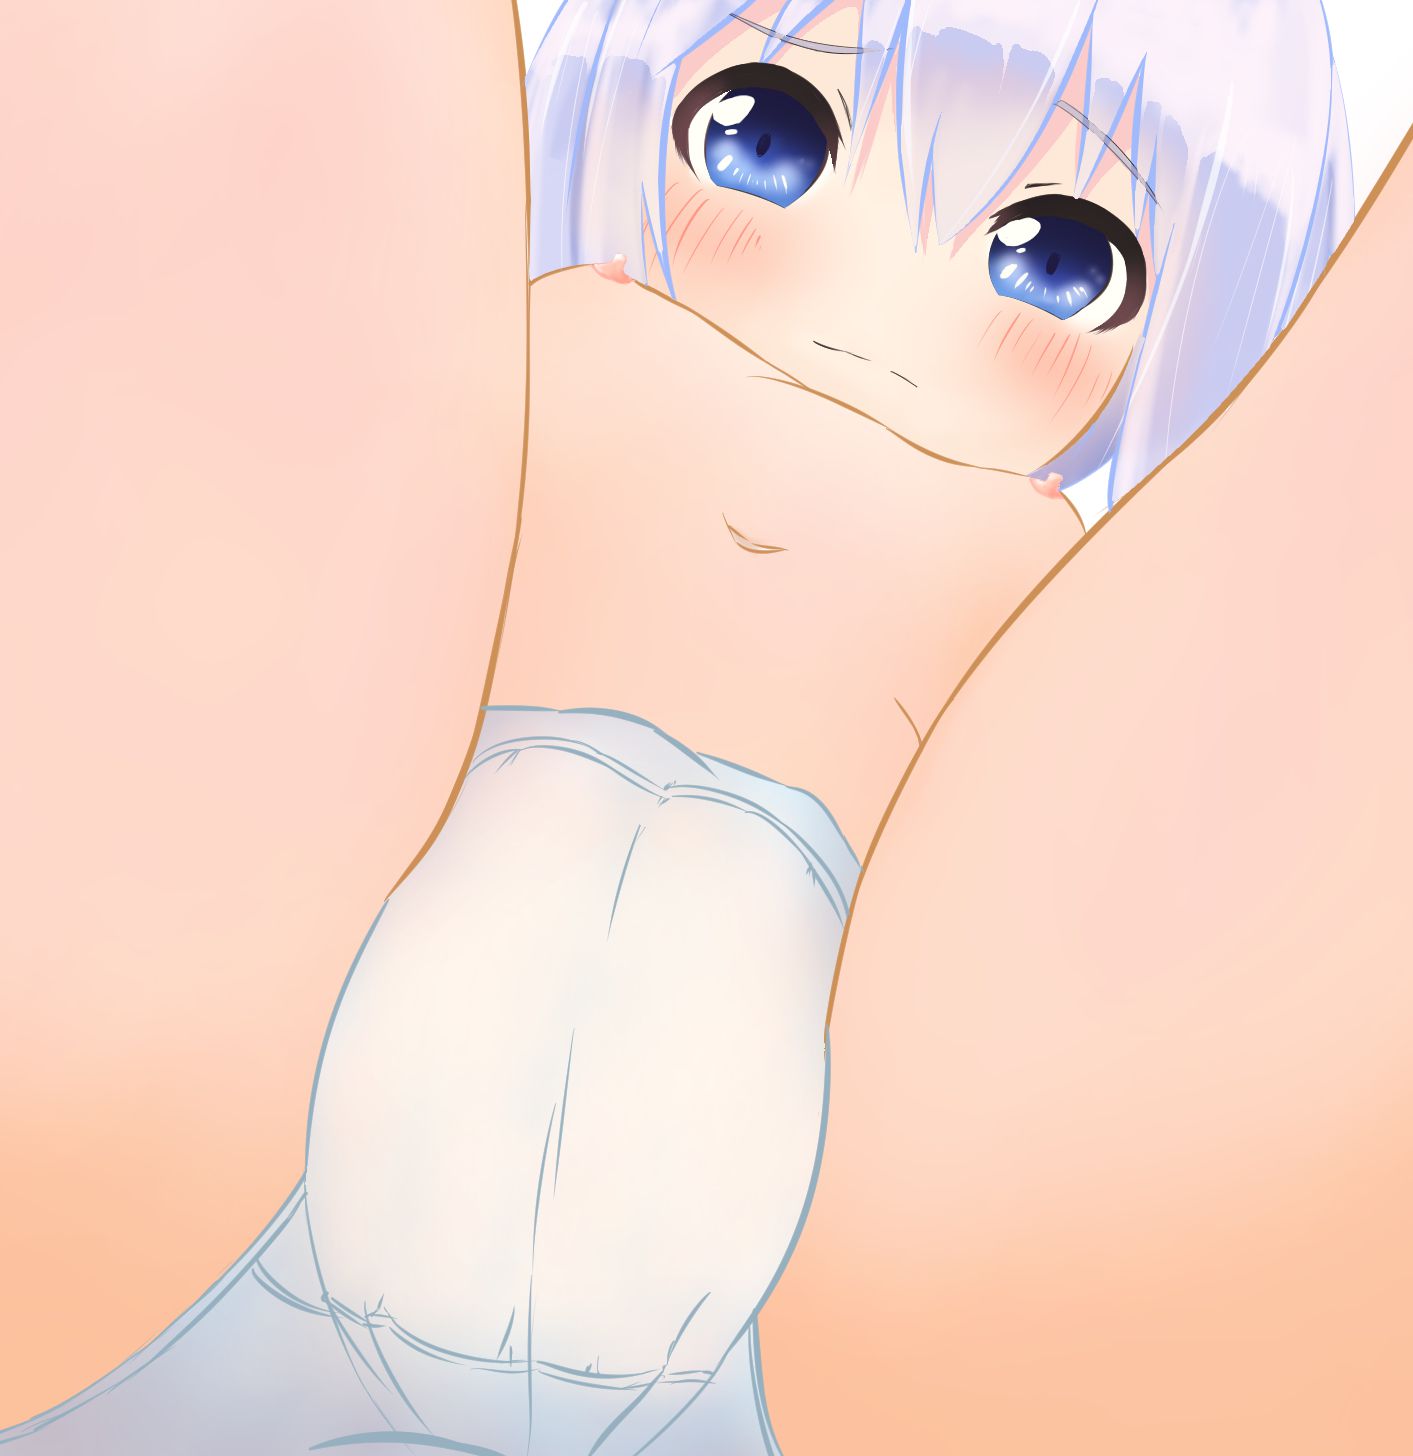 [Lori pants image] Loli pants secondary erotic image to become energetic on the weekend you want to spend looking at the cute pants of the secondary Loli girl 34